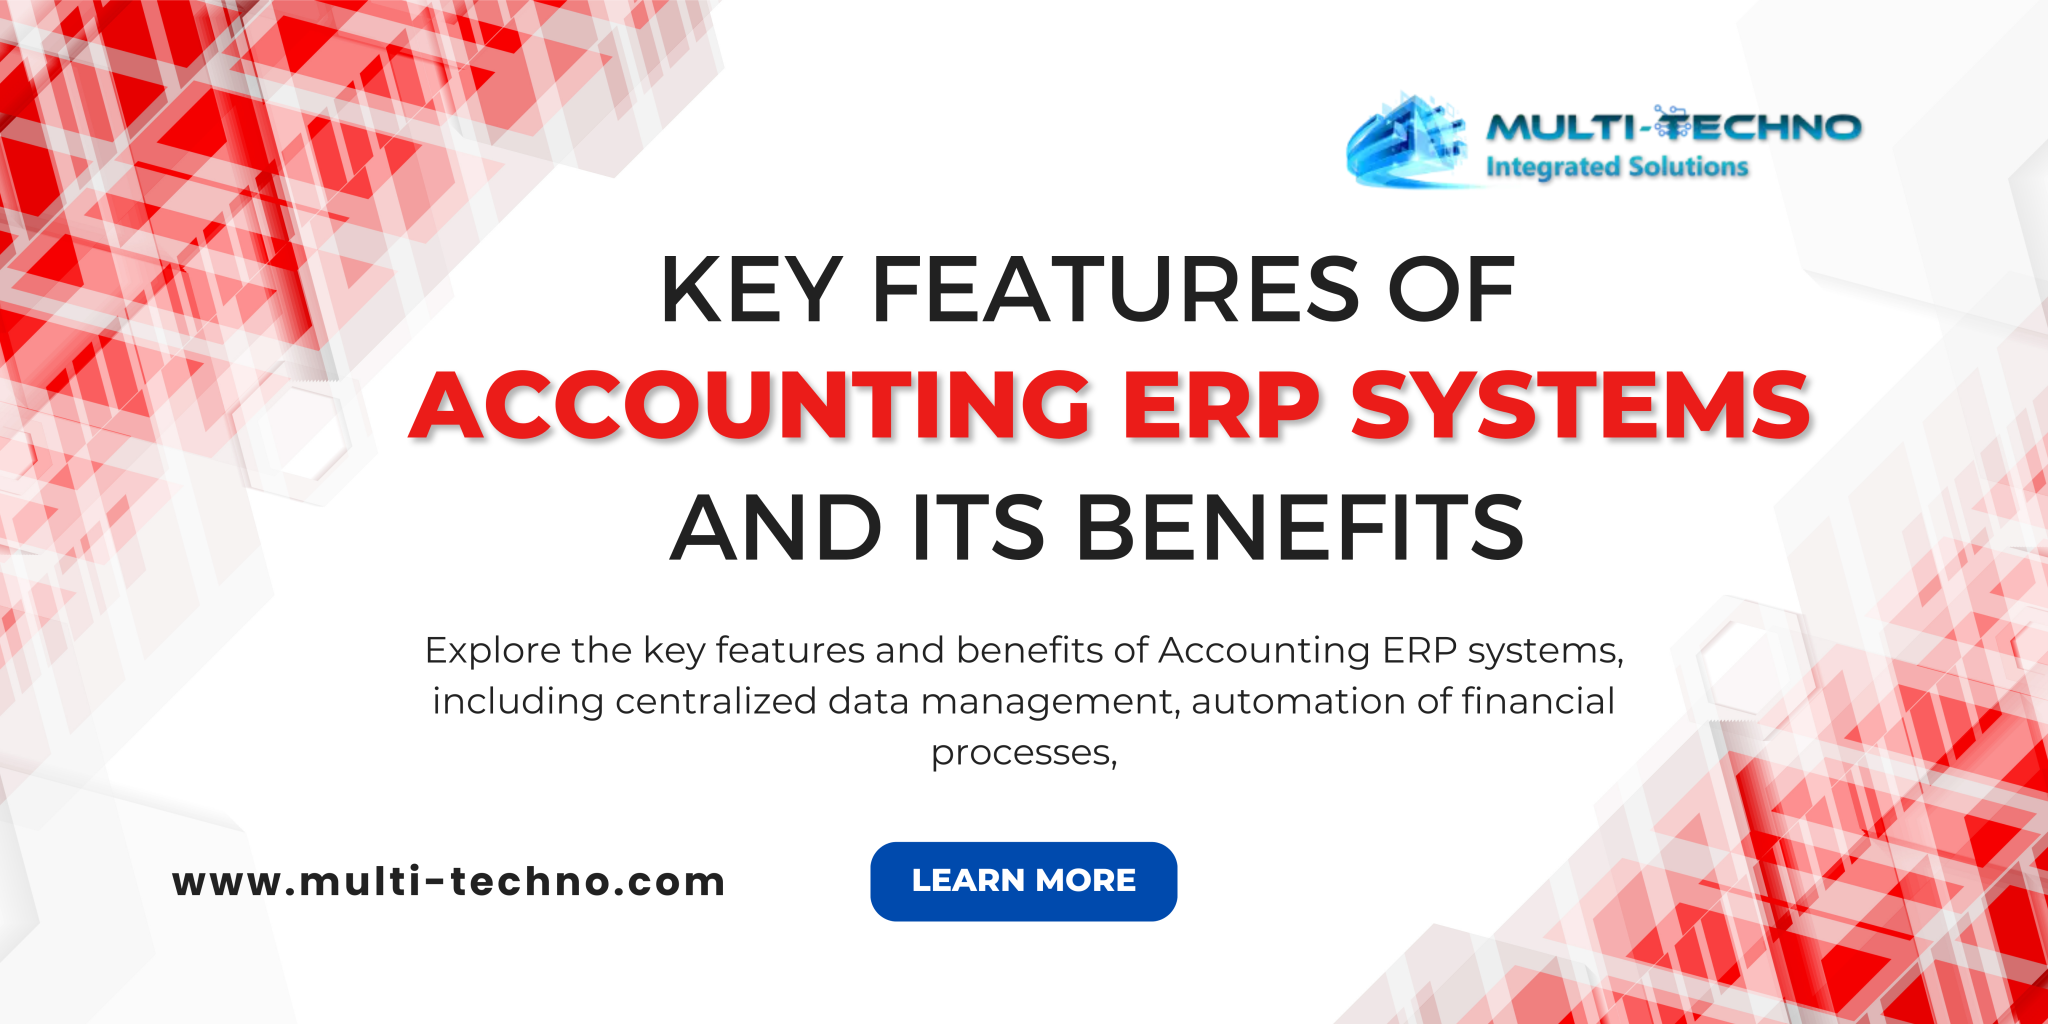 Key Features and Benefits of Accounting ERP Systems - Multi-Techno ...